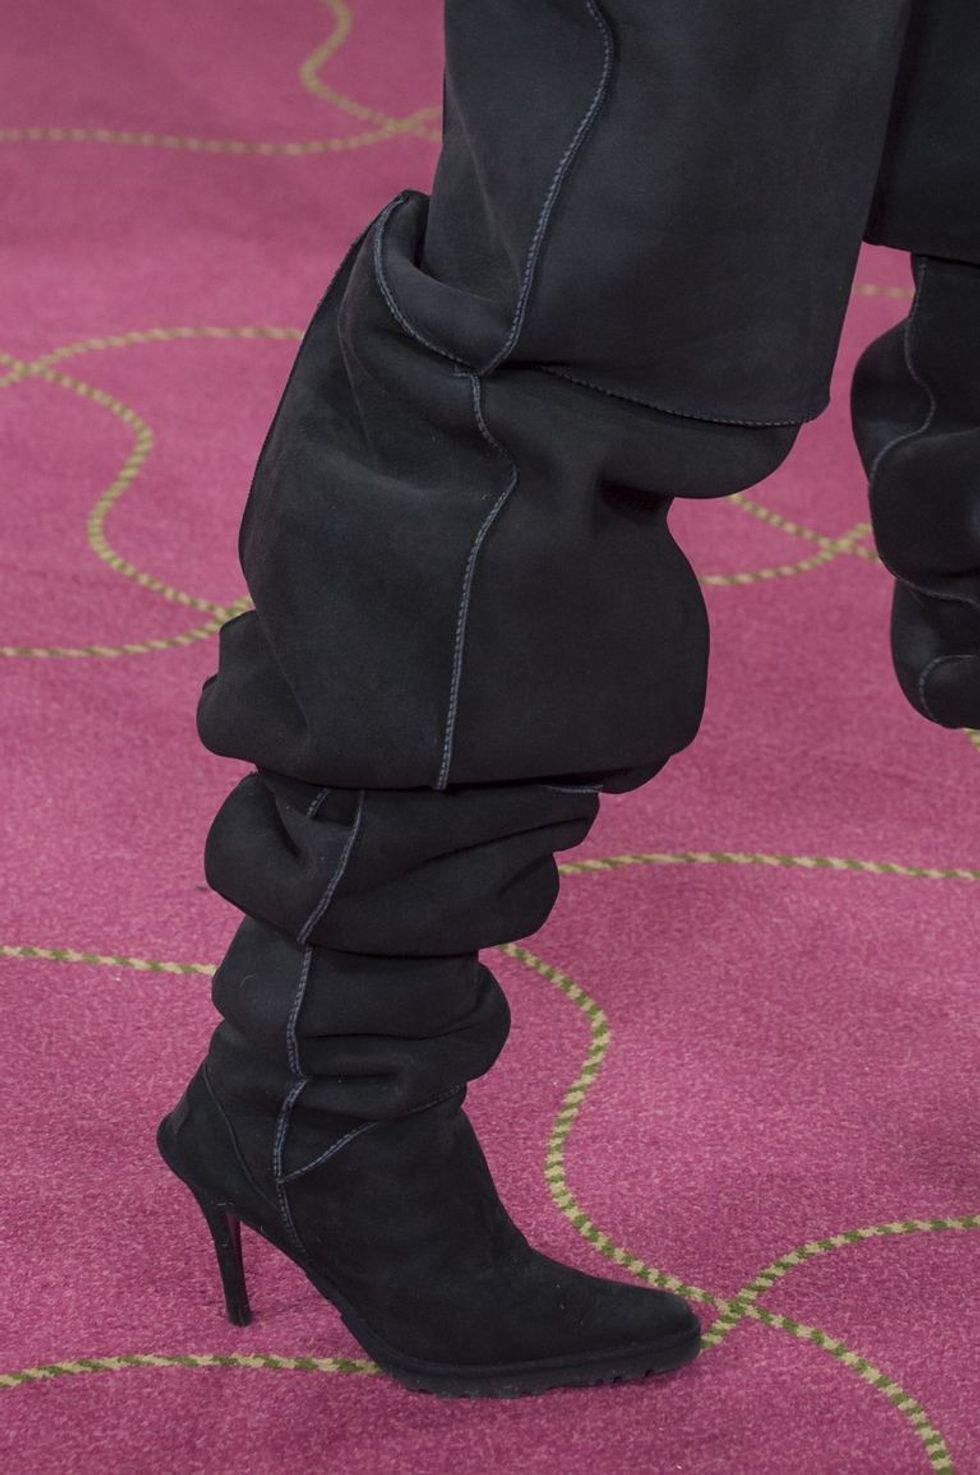 Y-Project Makes a Case For Thigh-High Stiletto UGGs - PAPER